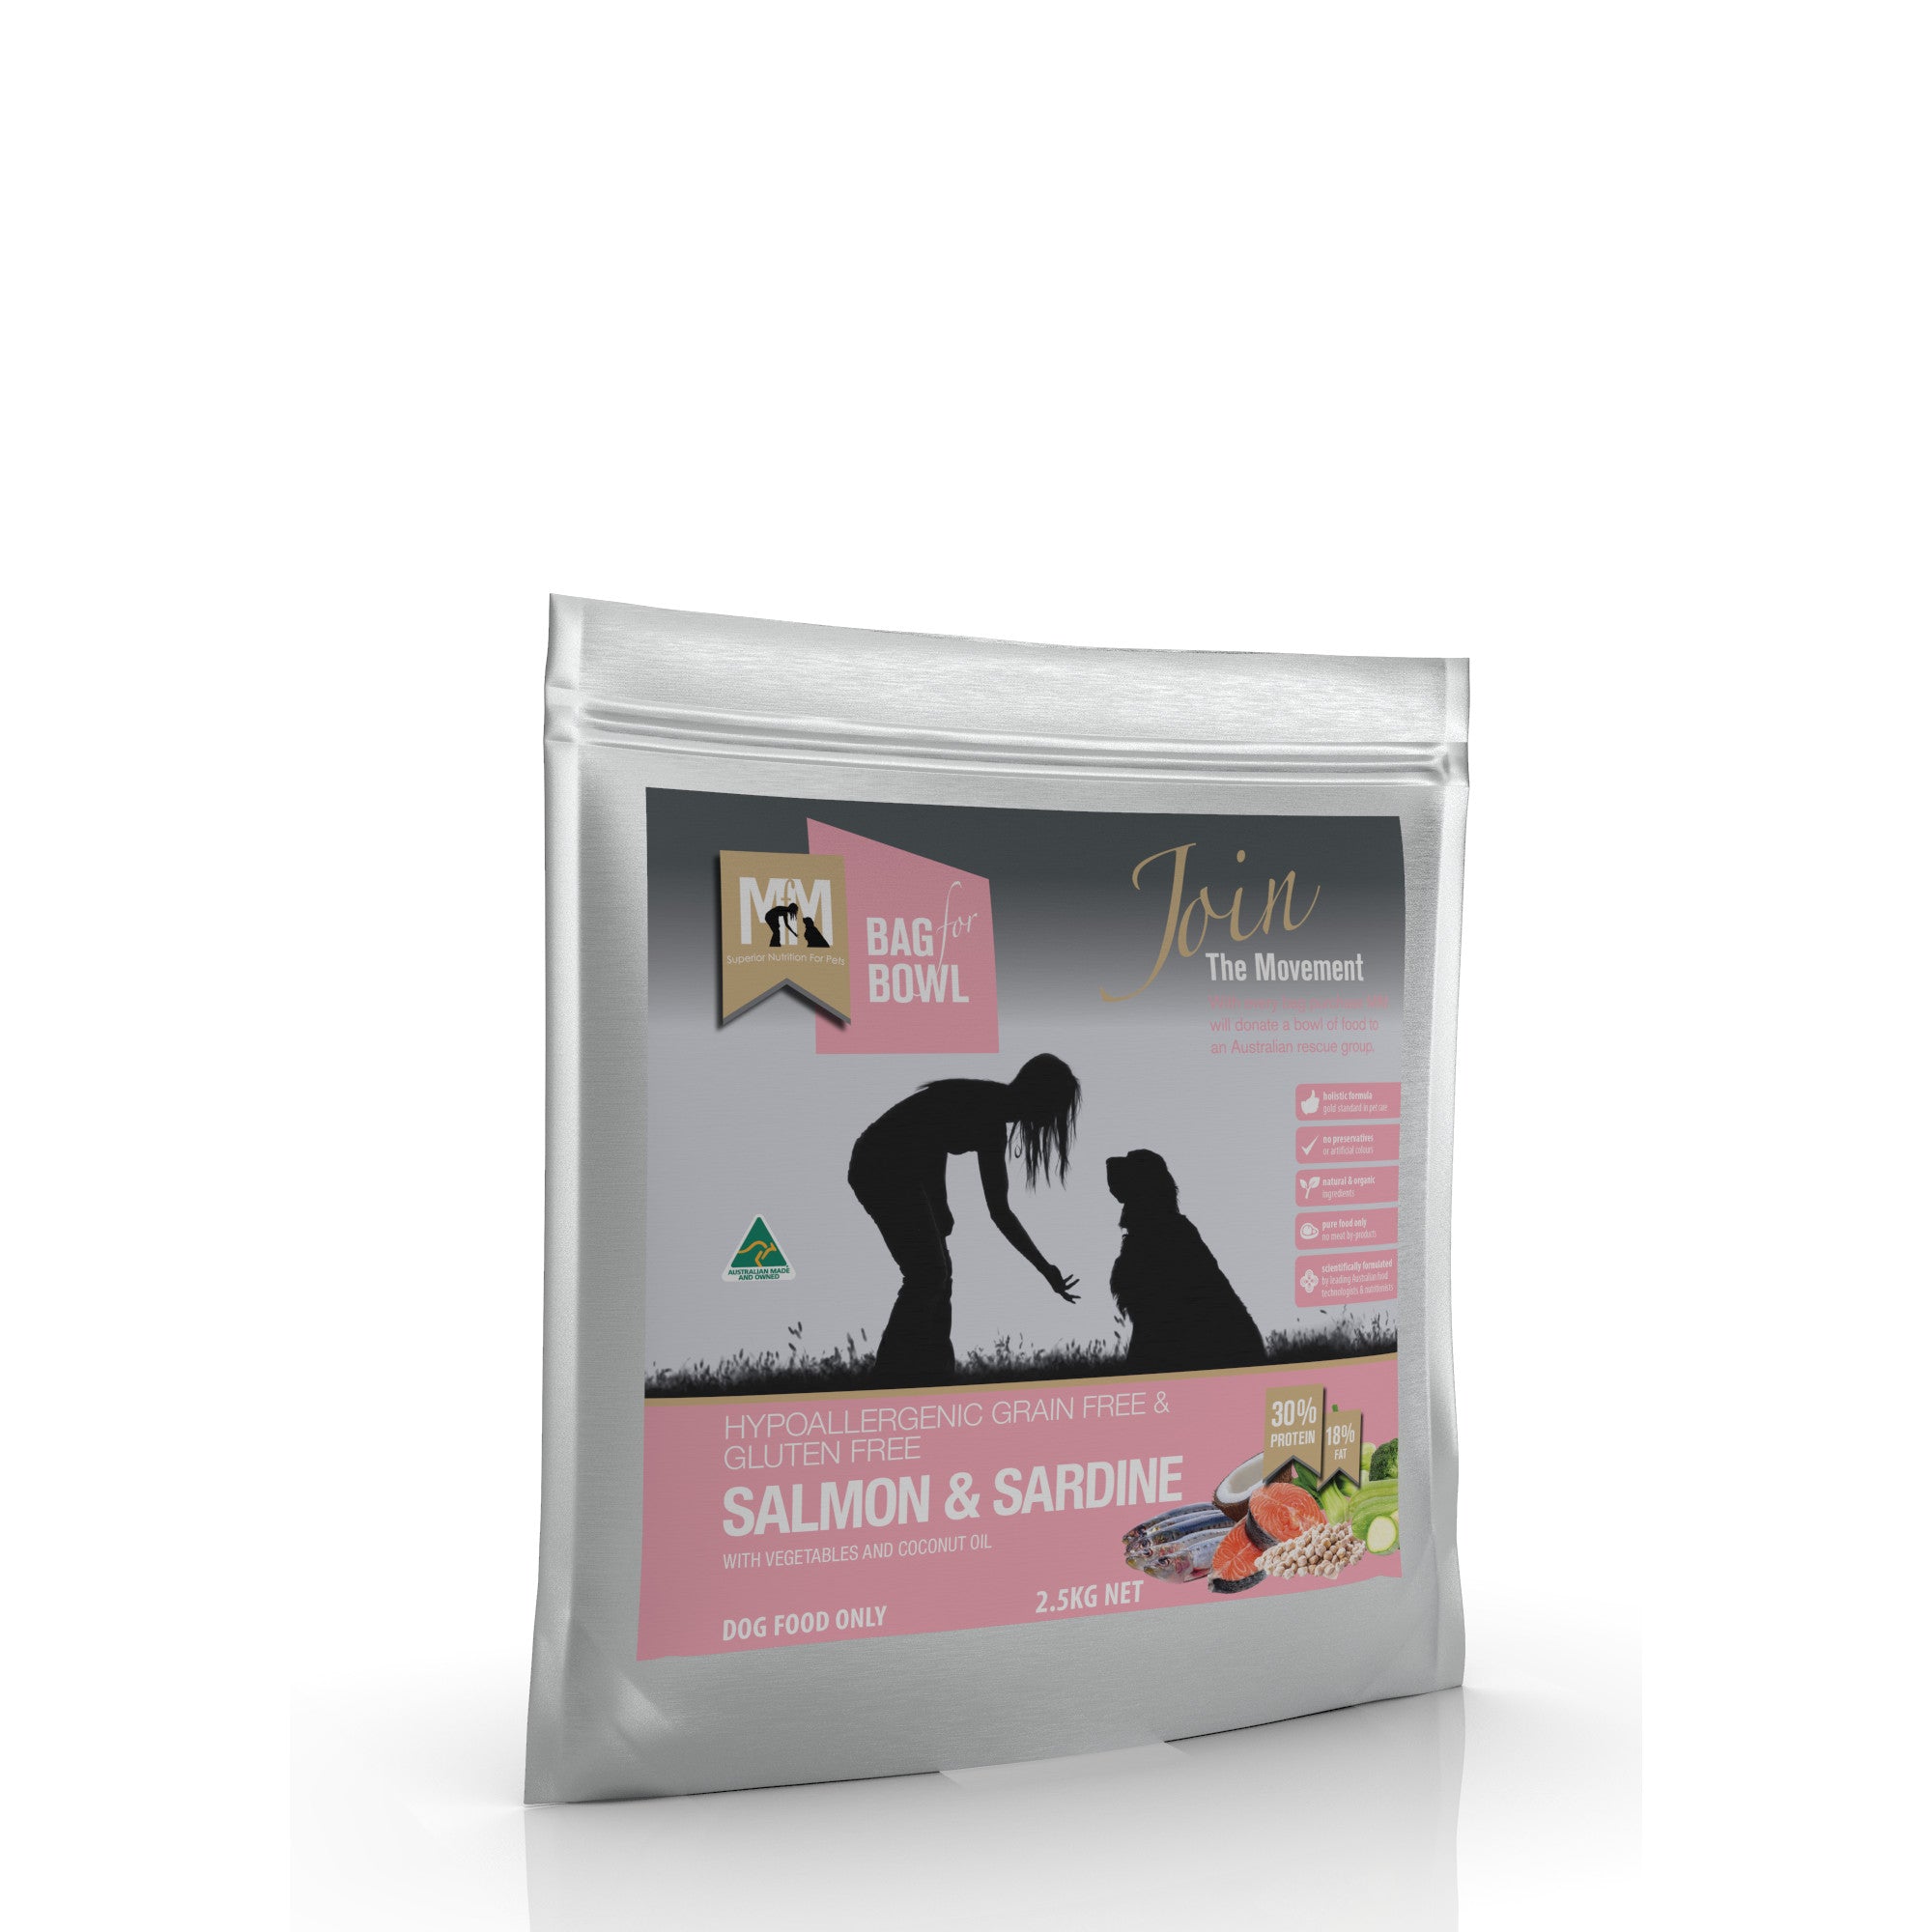 Meals for Mutts Grain Free Salmon and Sardine Dog Food 2.5kg.